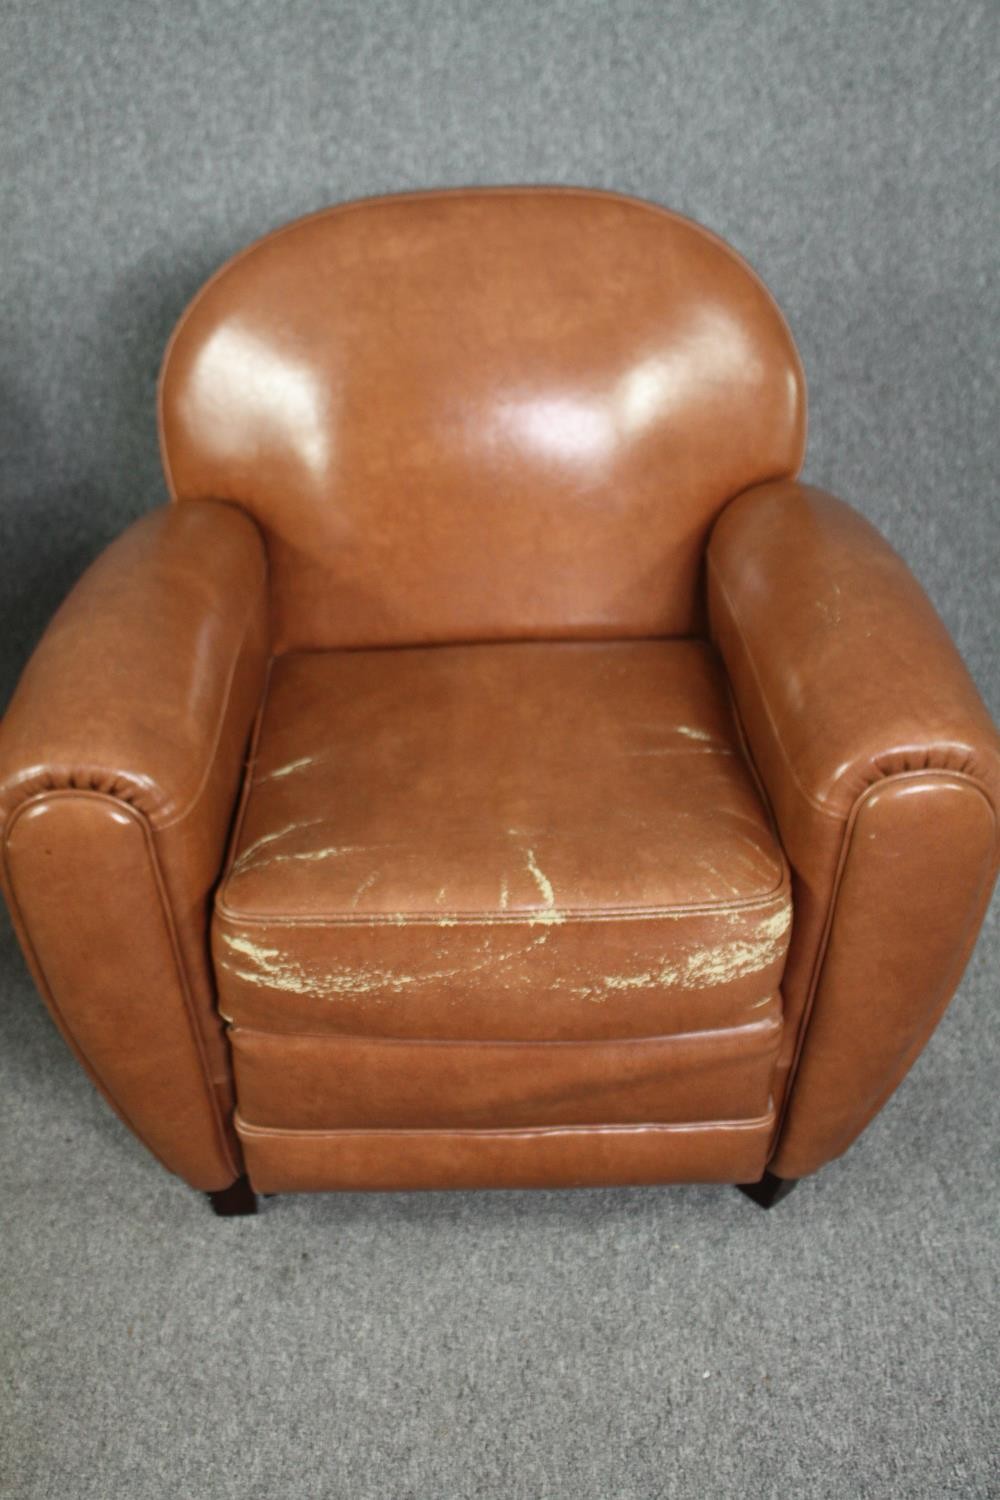 Armchairs, Art Deco style upholstered in faux leather. H.85 W.86 D.78cm. (Each) (Worn as seen). - Image 2 of 7